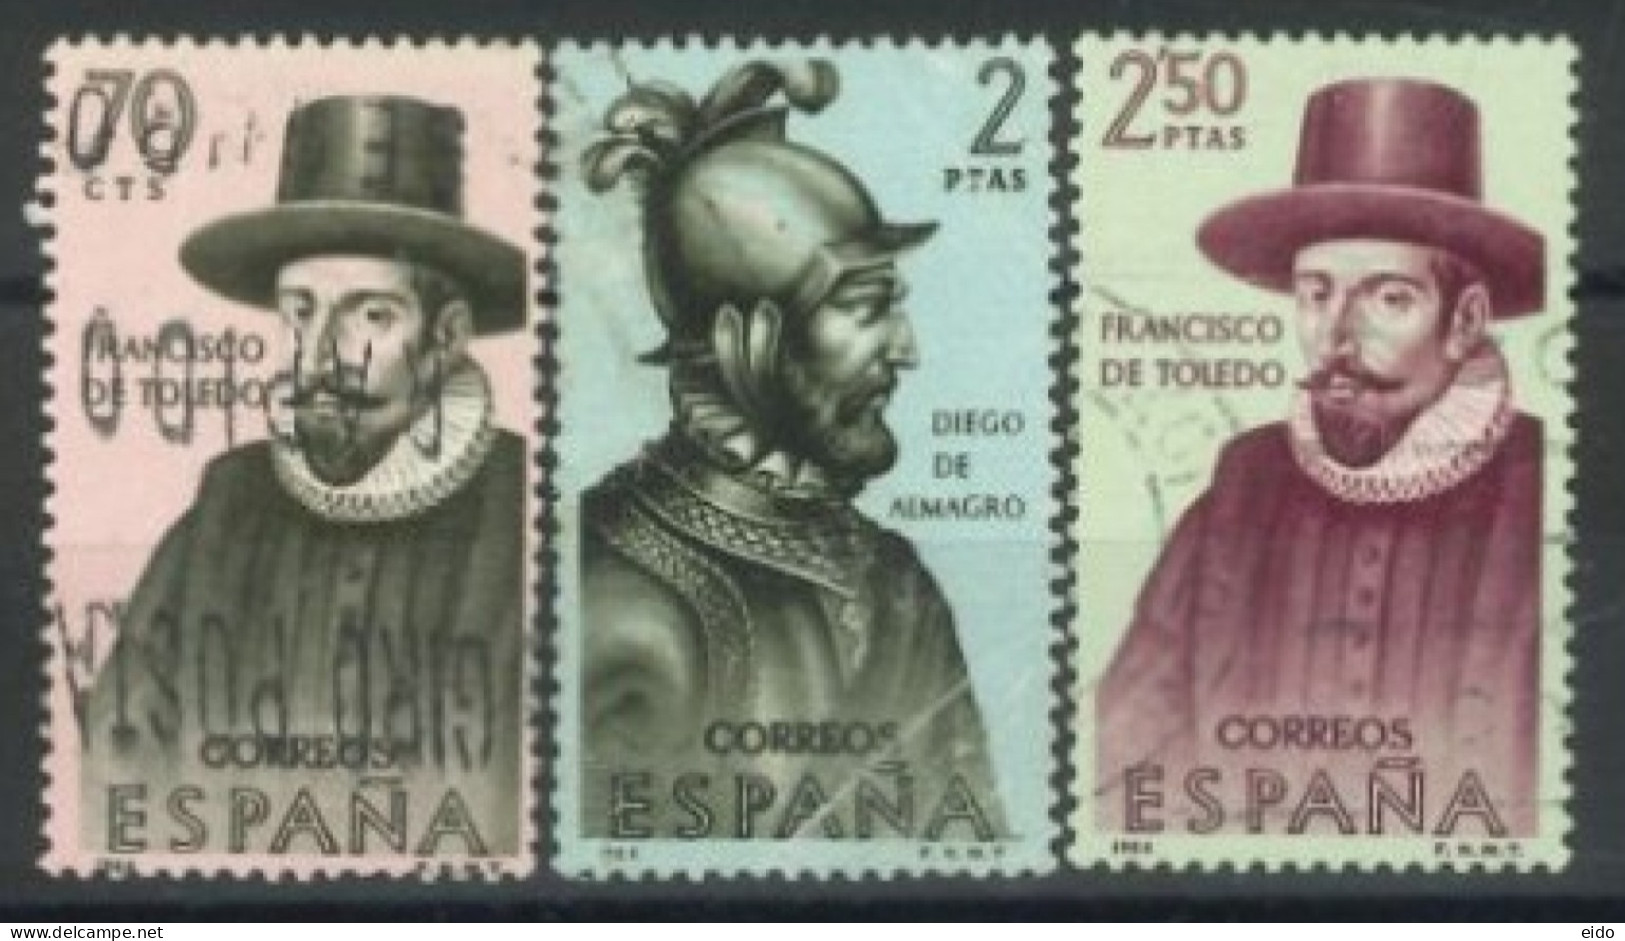 SPAIN, 1964, BUILDERS OF THE NEW WORLD STAMPS SET OF 3, # 1272,1274,& 1276, USED. - Usados